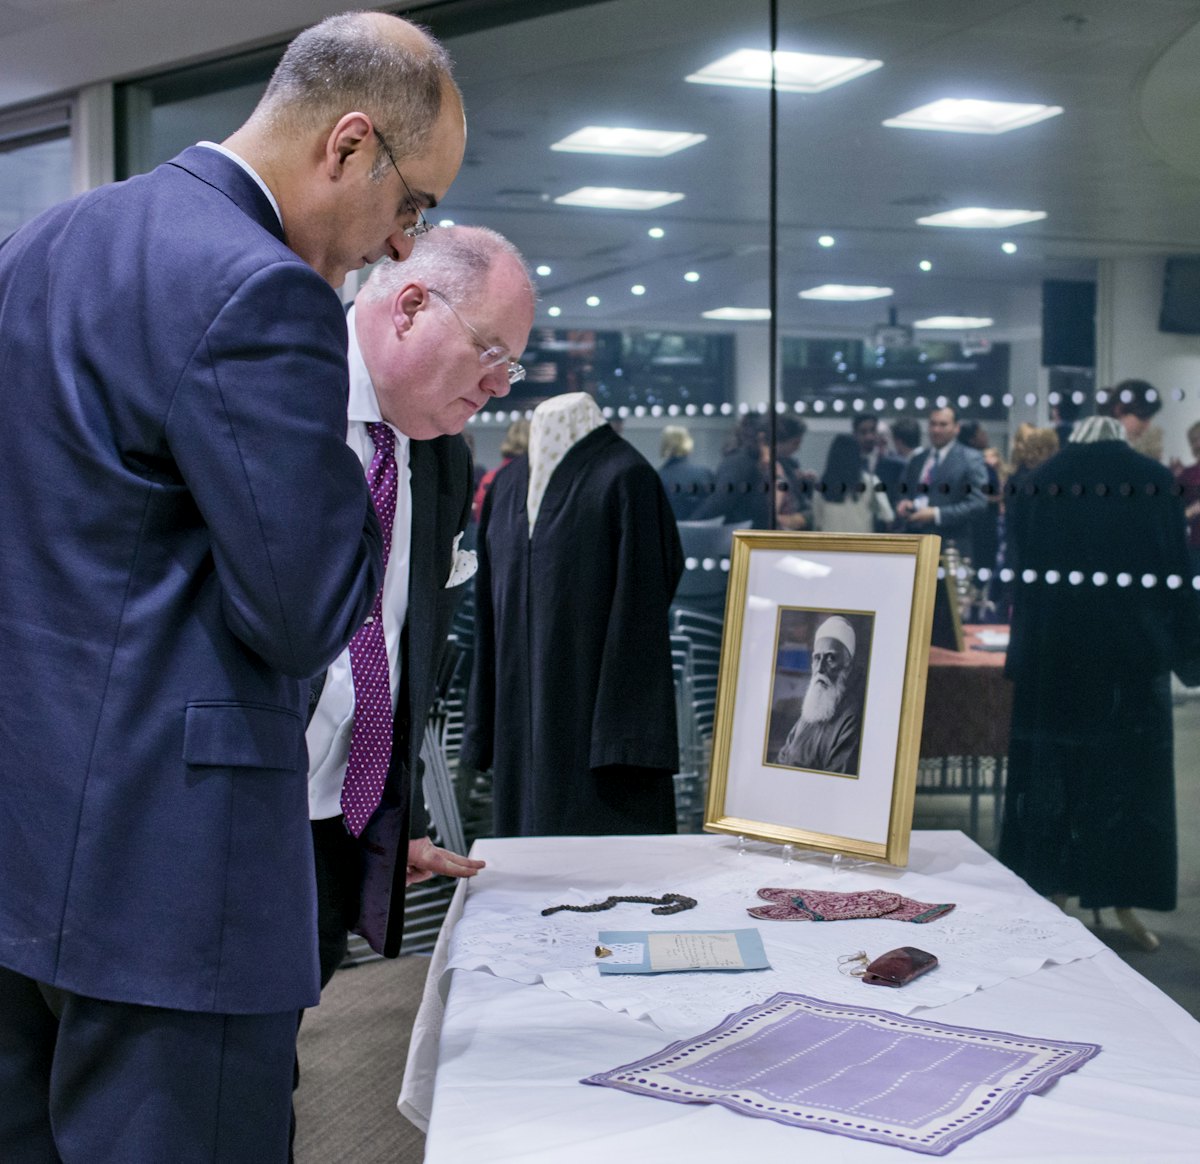 Eric Pickles MP, Secretary of State for Communities and Local Government– pictured right – examines personal and historical items associated with ‘Abdu’l-Baha at a reception hosted by the British government for the Baha’i community, 28 November 2012.